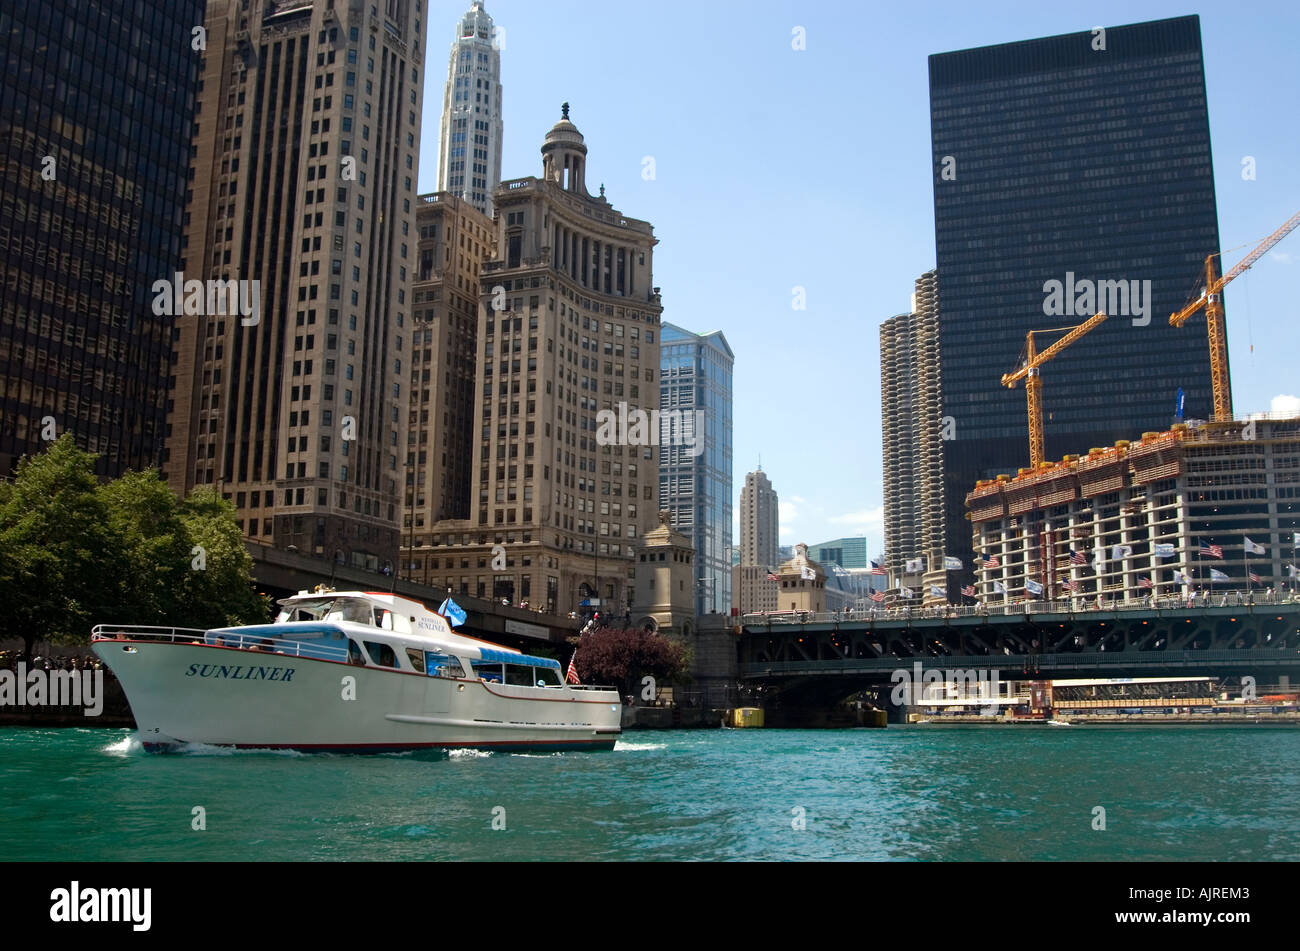 Chicago River Tour & Trump Tower Construction Stock Photo